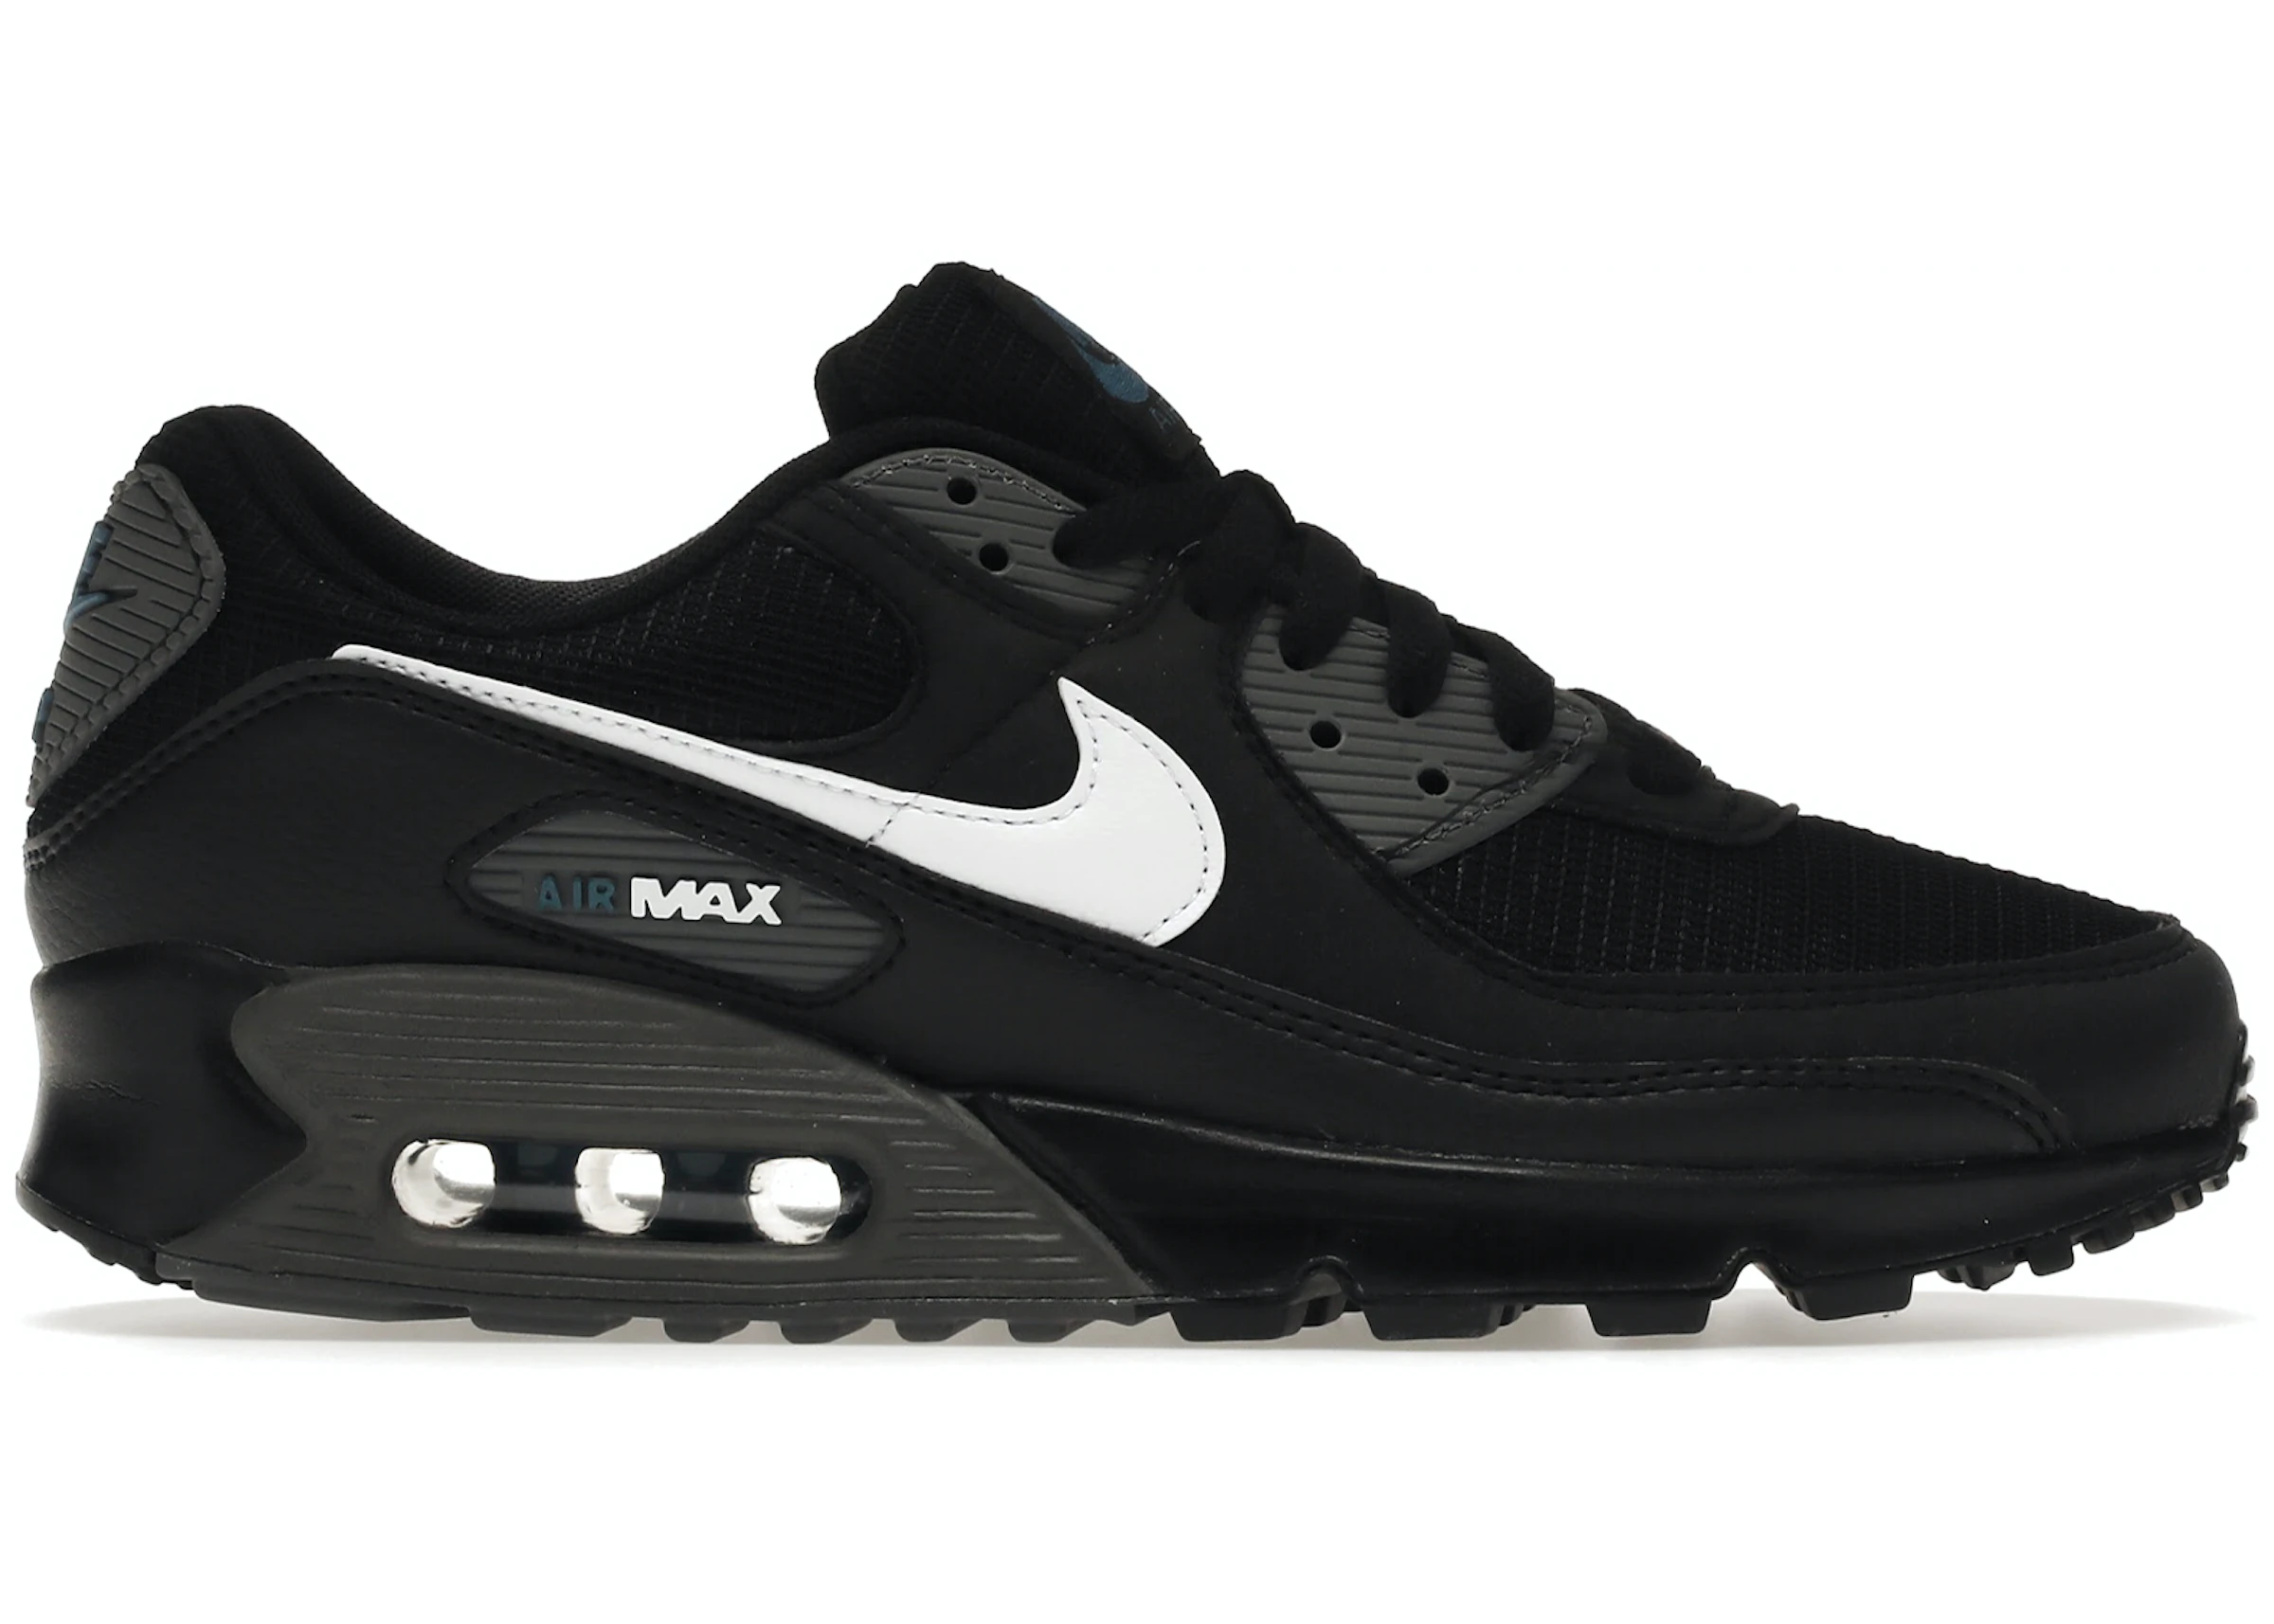 Air Max nike cross training shoes 90s 90 - All Sizes & Colorways at StockX